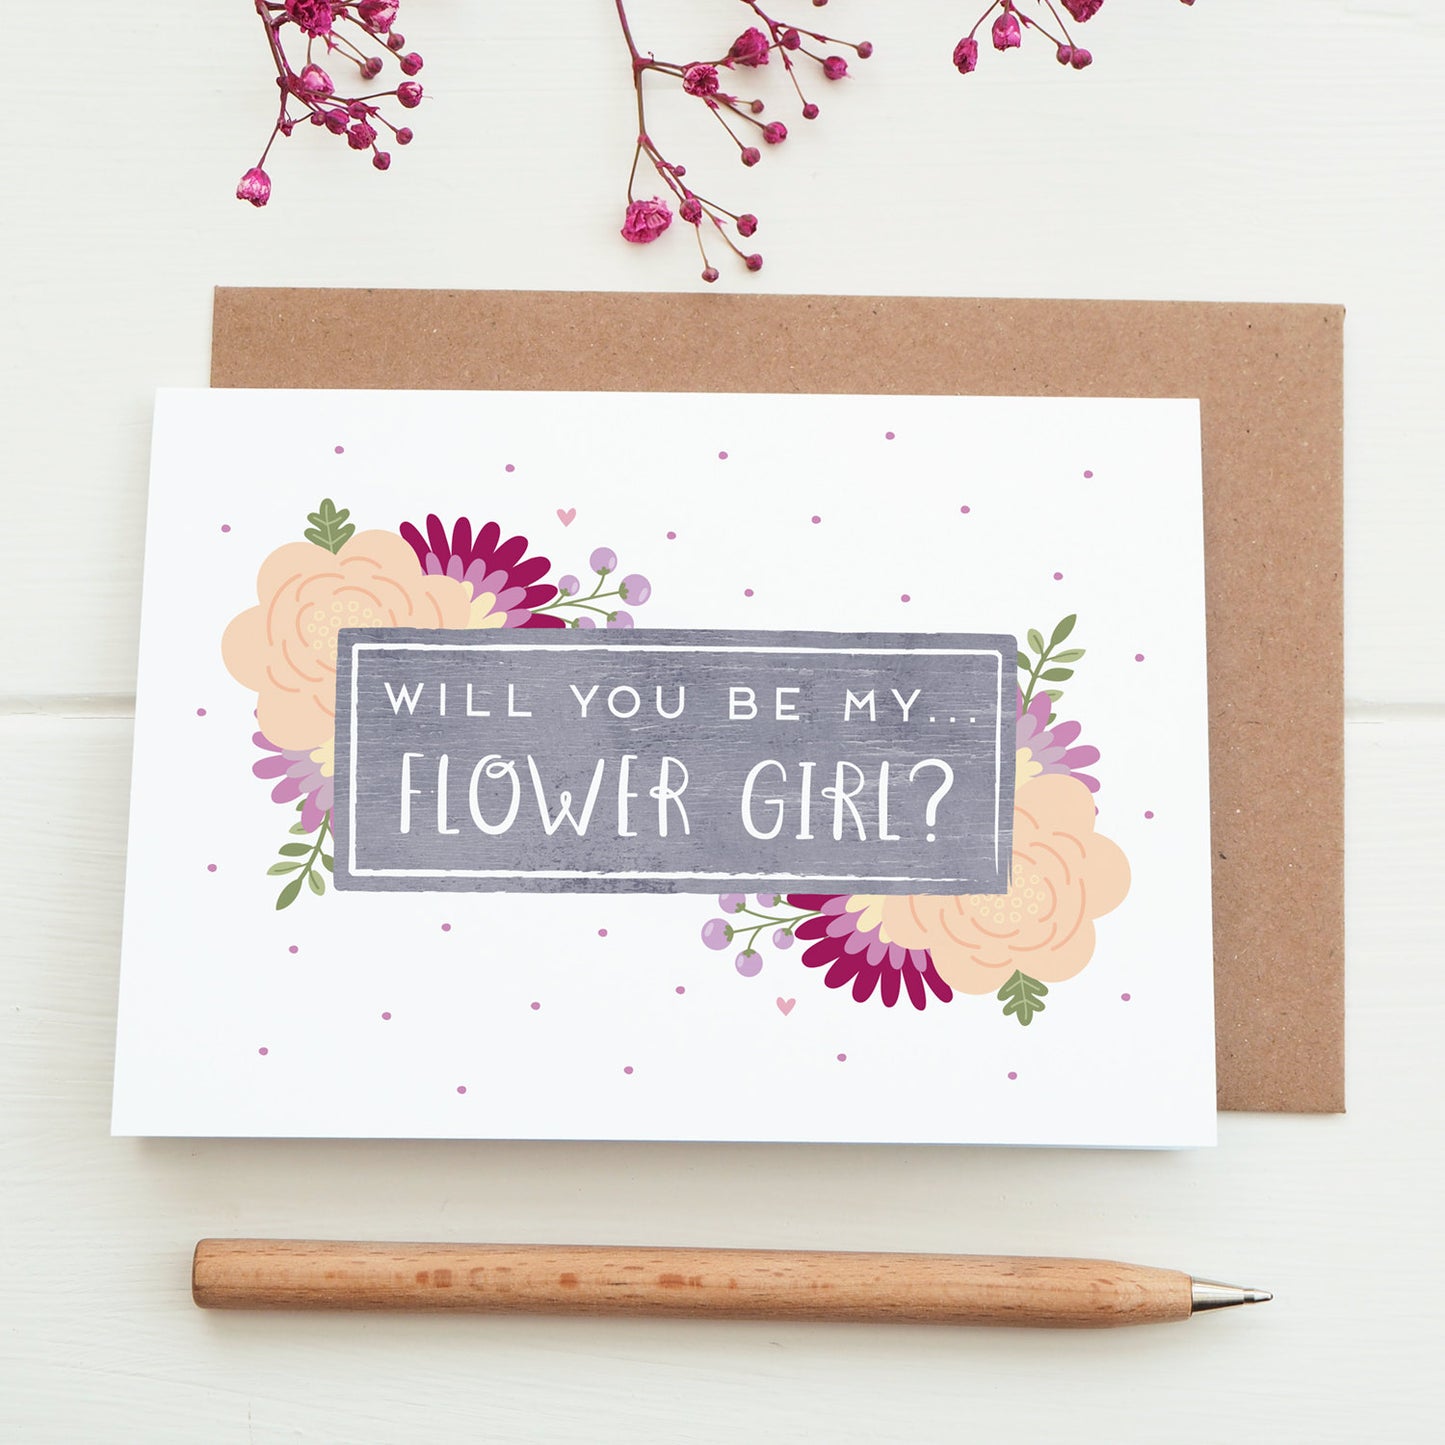 Will you be flower girl card in purple